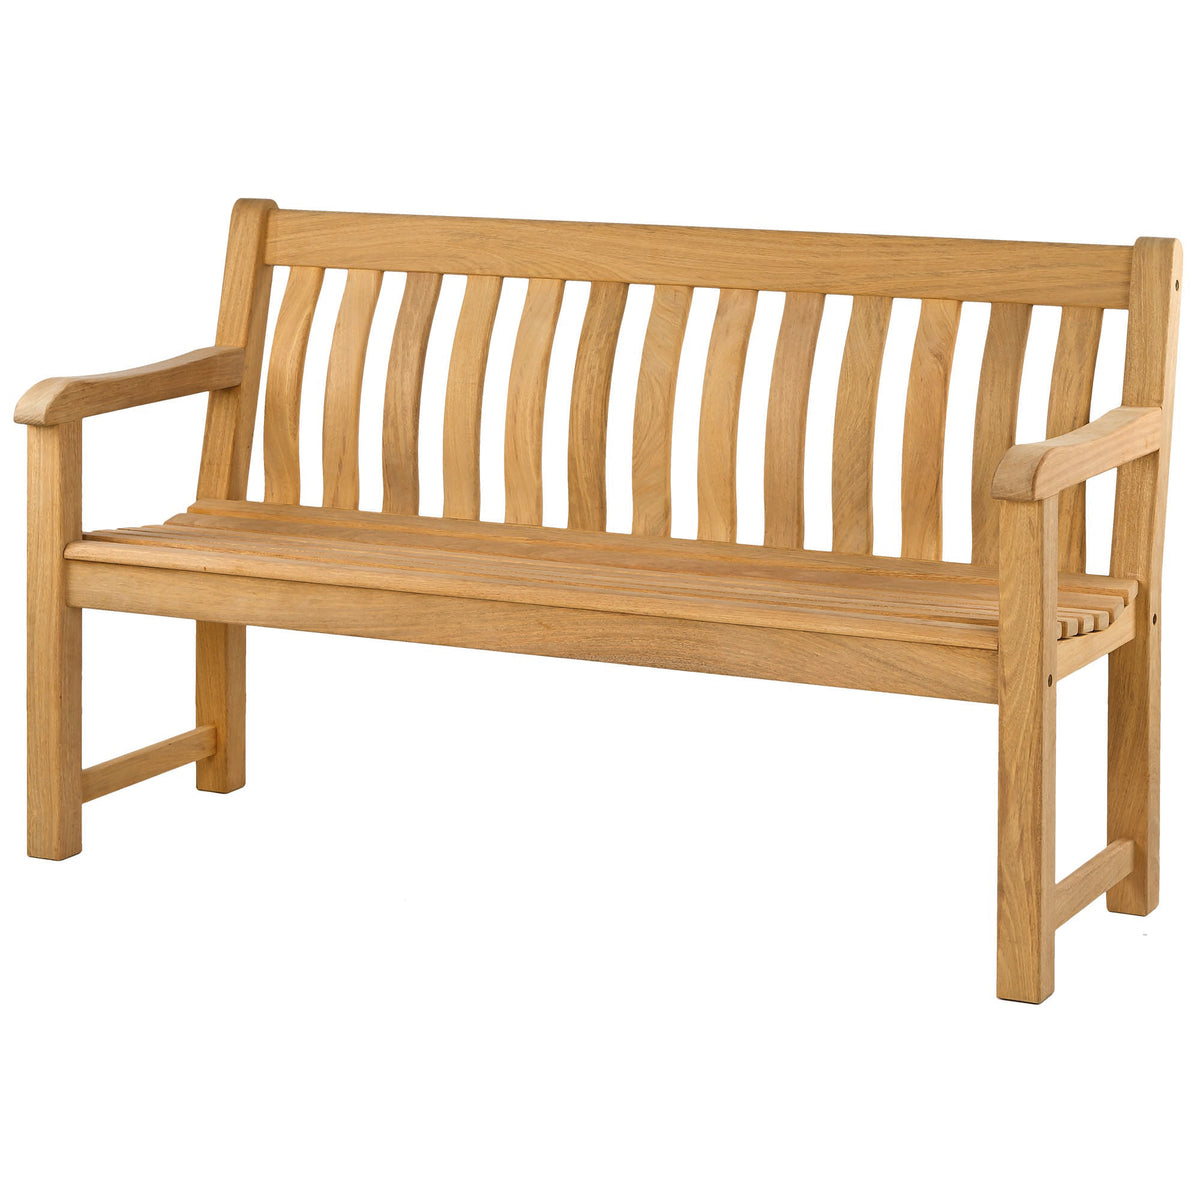 Alexander Rose Roble St George Bench 5ft (1.5m)